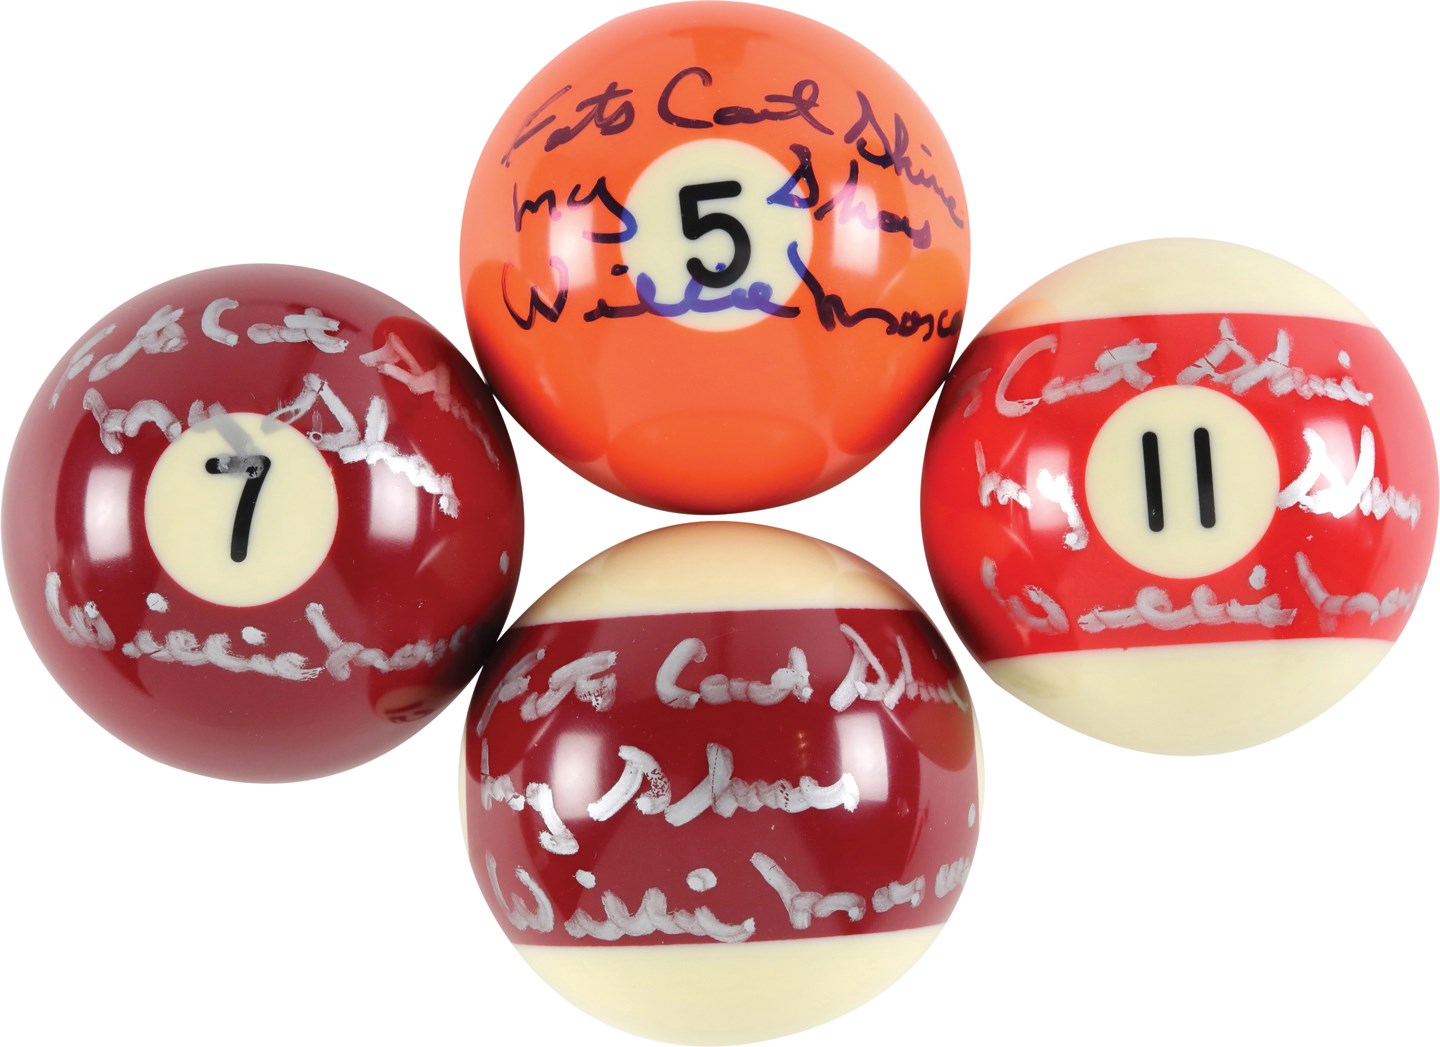 - Willie Mosconi "Fats Can't Shine My Shoes" Signed Pool Ball Collection (4) PSA/DNA